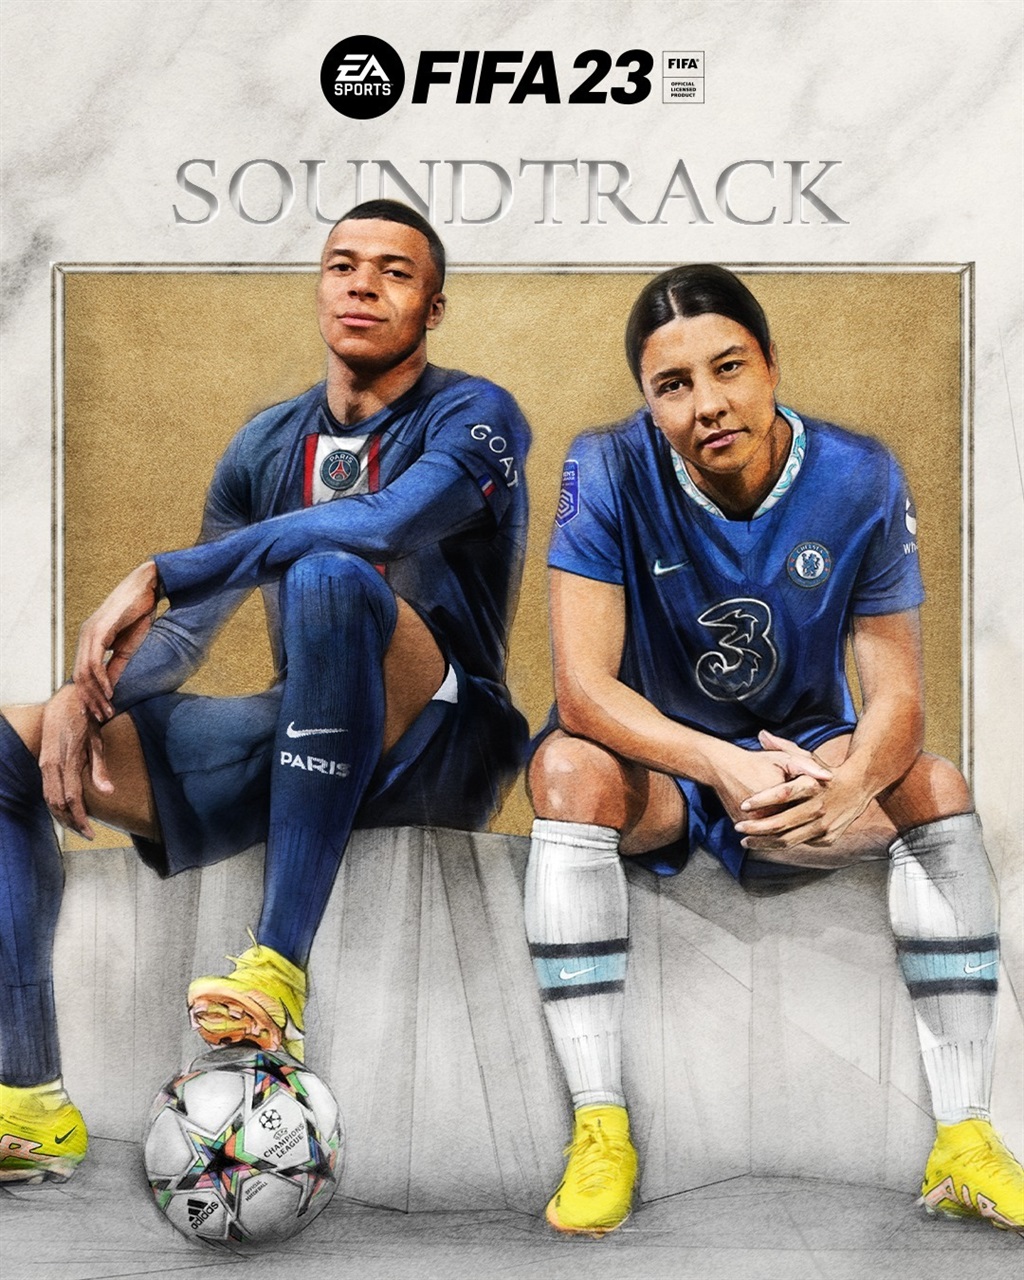 The cover for the FIFA 23 game and soundtrack. 